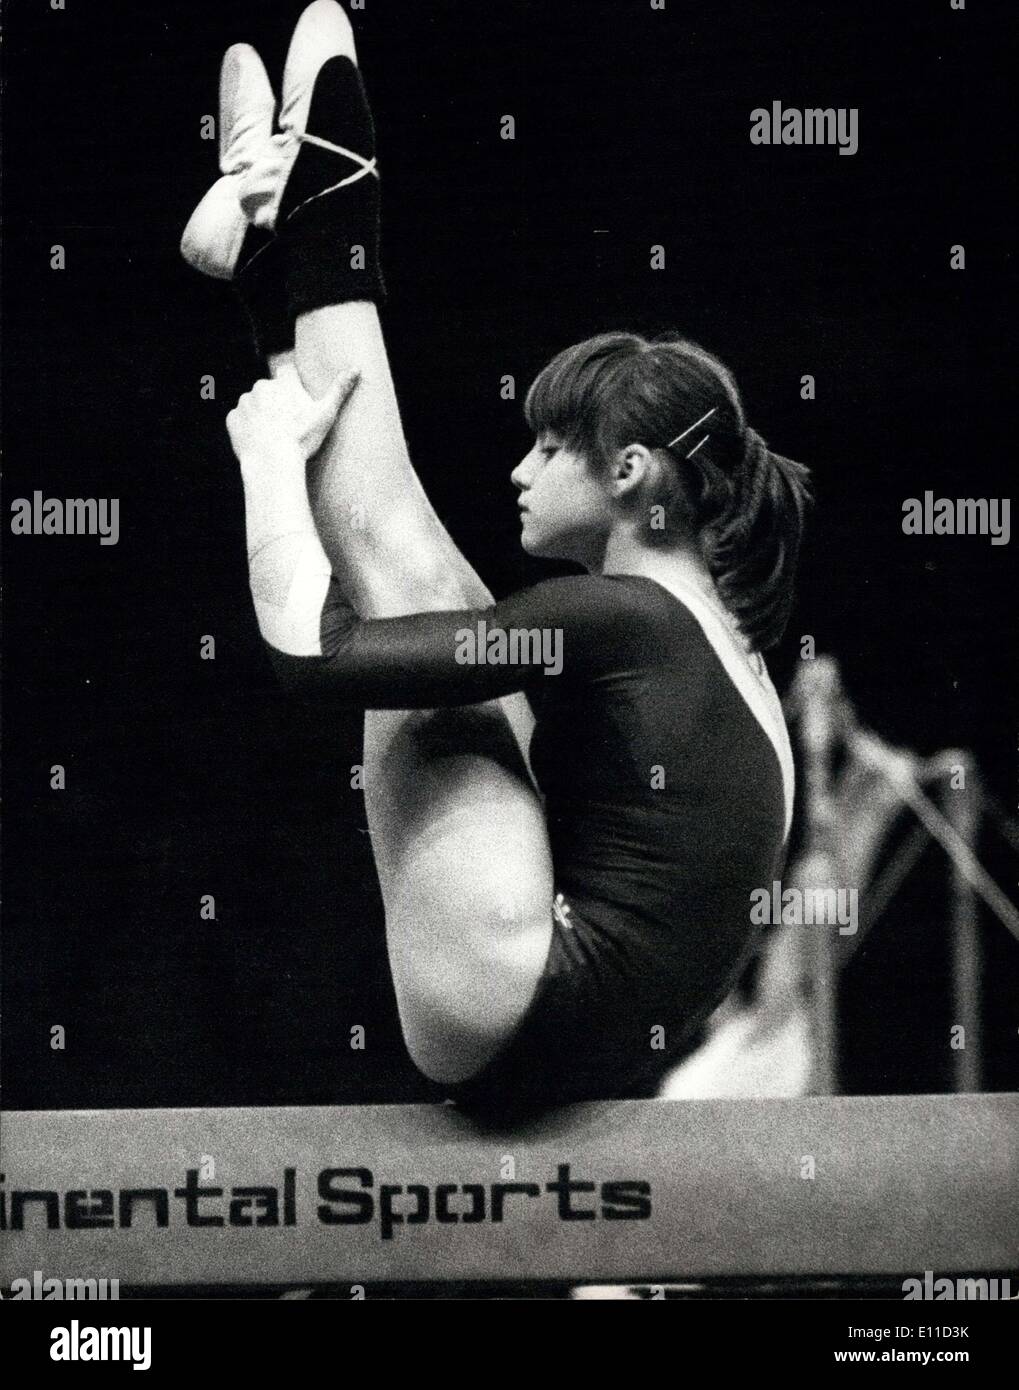 Apr. 15, 1977 - ''Champions All' International Gymnastics Tournament At Empire Pool Wembley: The line up for the British Amateur Gymnastics Association Daily Mirror Champions All' International Gymanstics Tournament which takes place tomorrow at the Empire Pool Wembley. For the first time in the history of the event the two current champions will be defending their titles. Teodora Ungureanu from Rumania, rated as number 3 in the world, and Peter Korman of America. who was an Olympic bronze medalist in Montreal Stock Photo